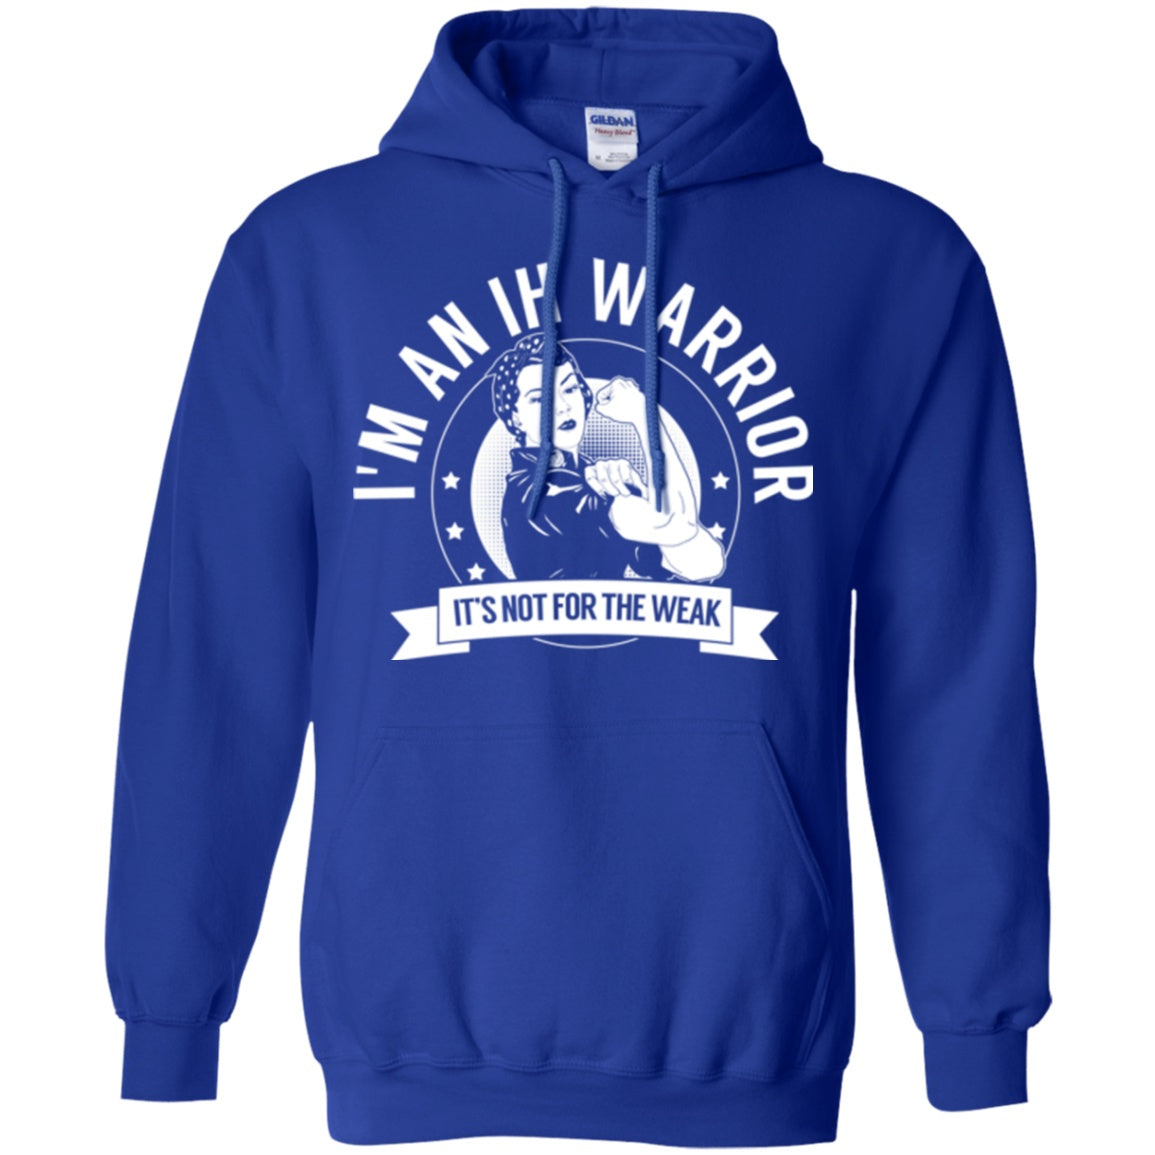 Idiopathic Hypersomnia - IH Warrior Not For The Weak Pullover Hoodie 8 oz. - The Unchargeables